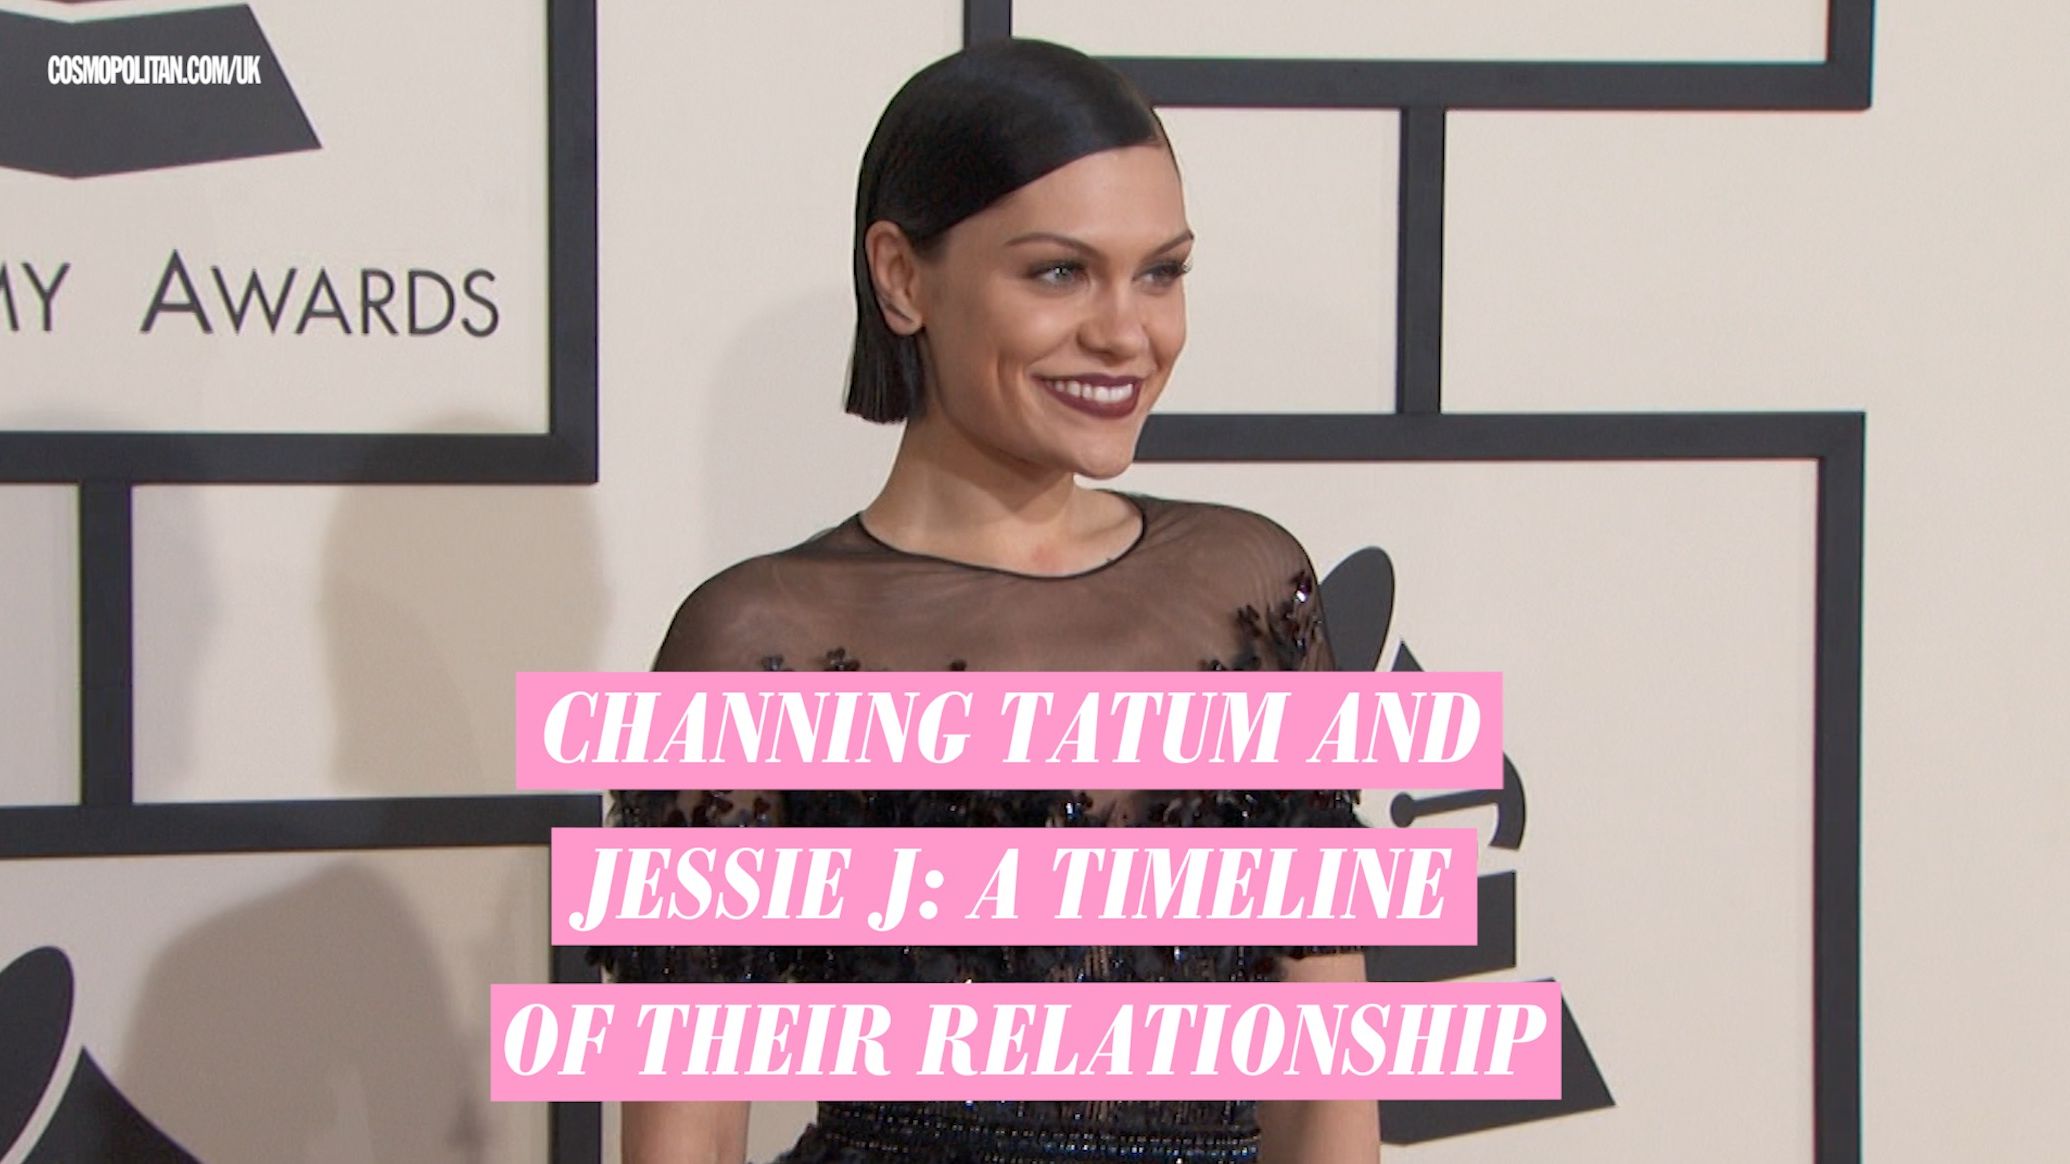 Jessie J will open up about Channing Tatum relationship on new album with  emotional song about 'rushing into love